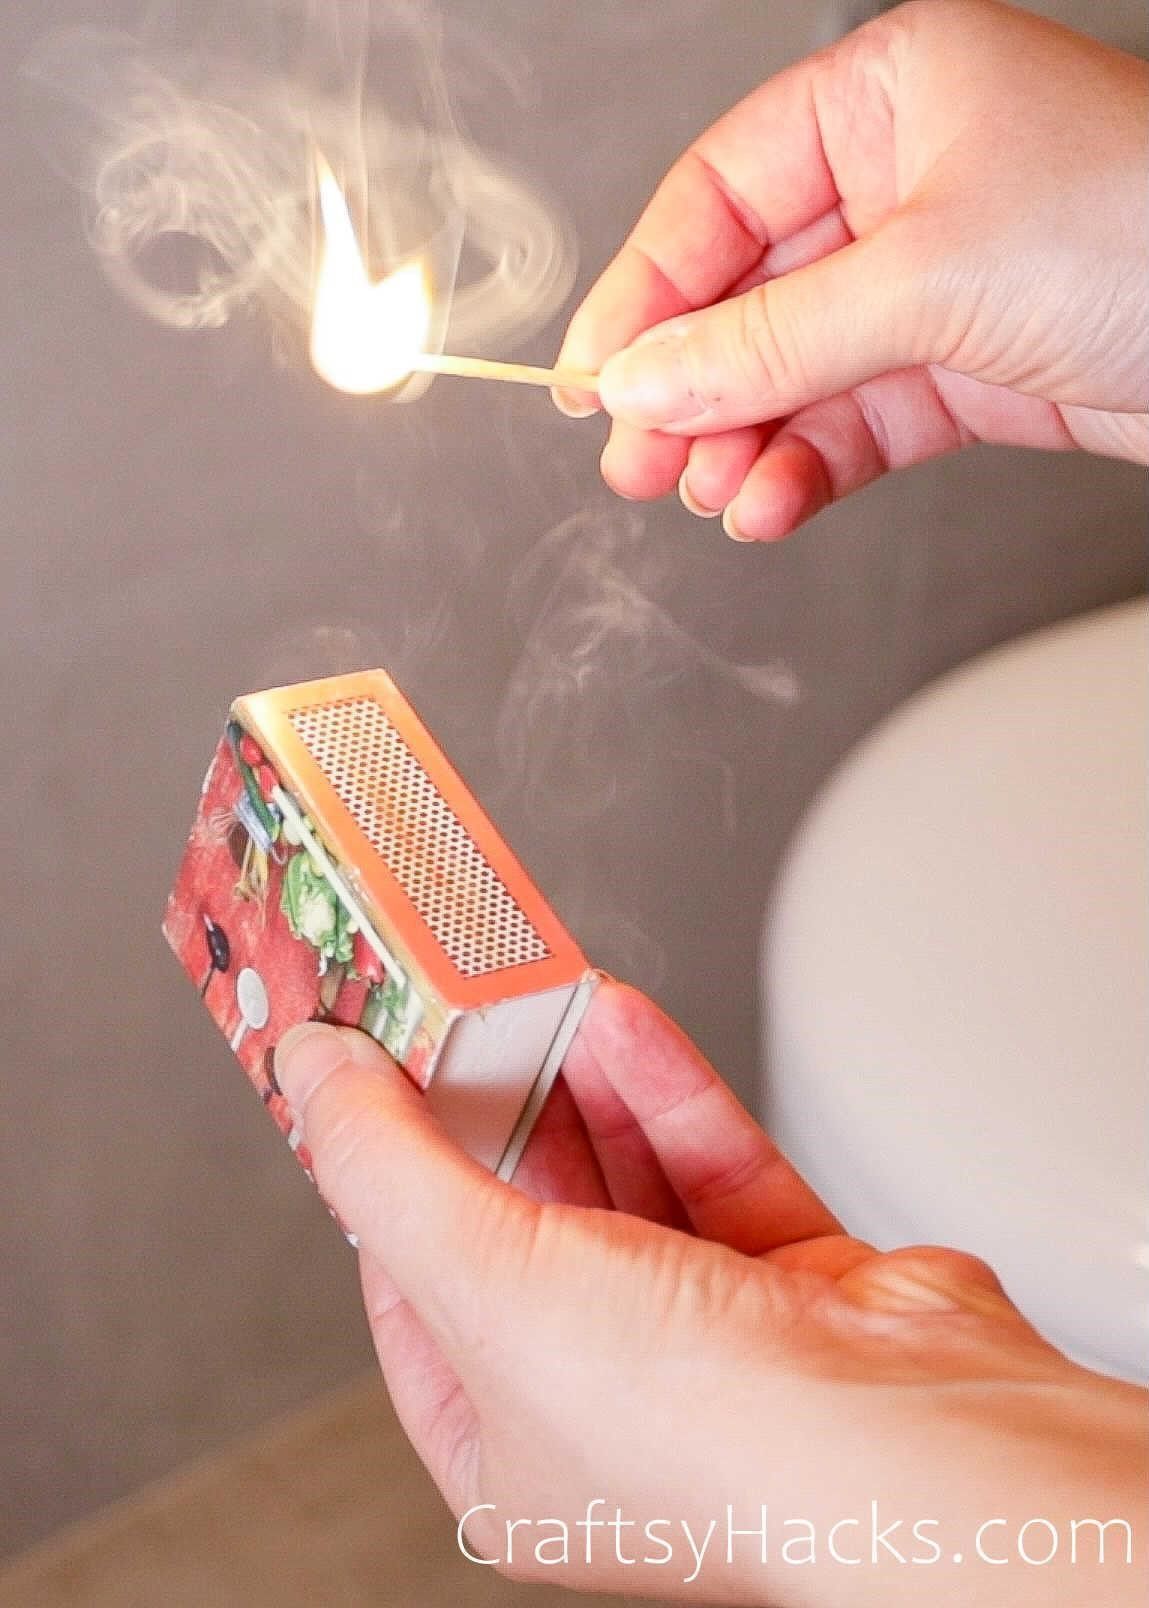 use matches for bad odor